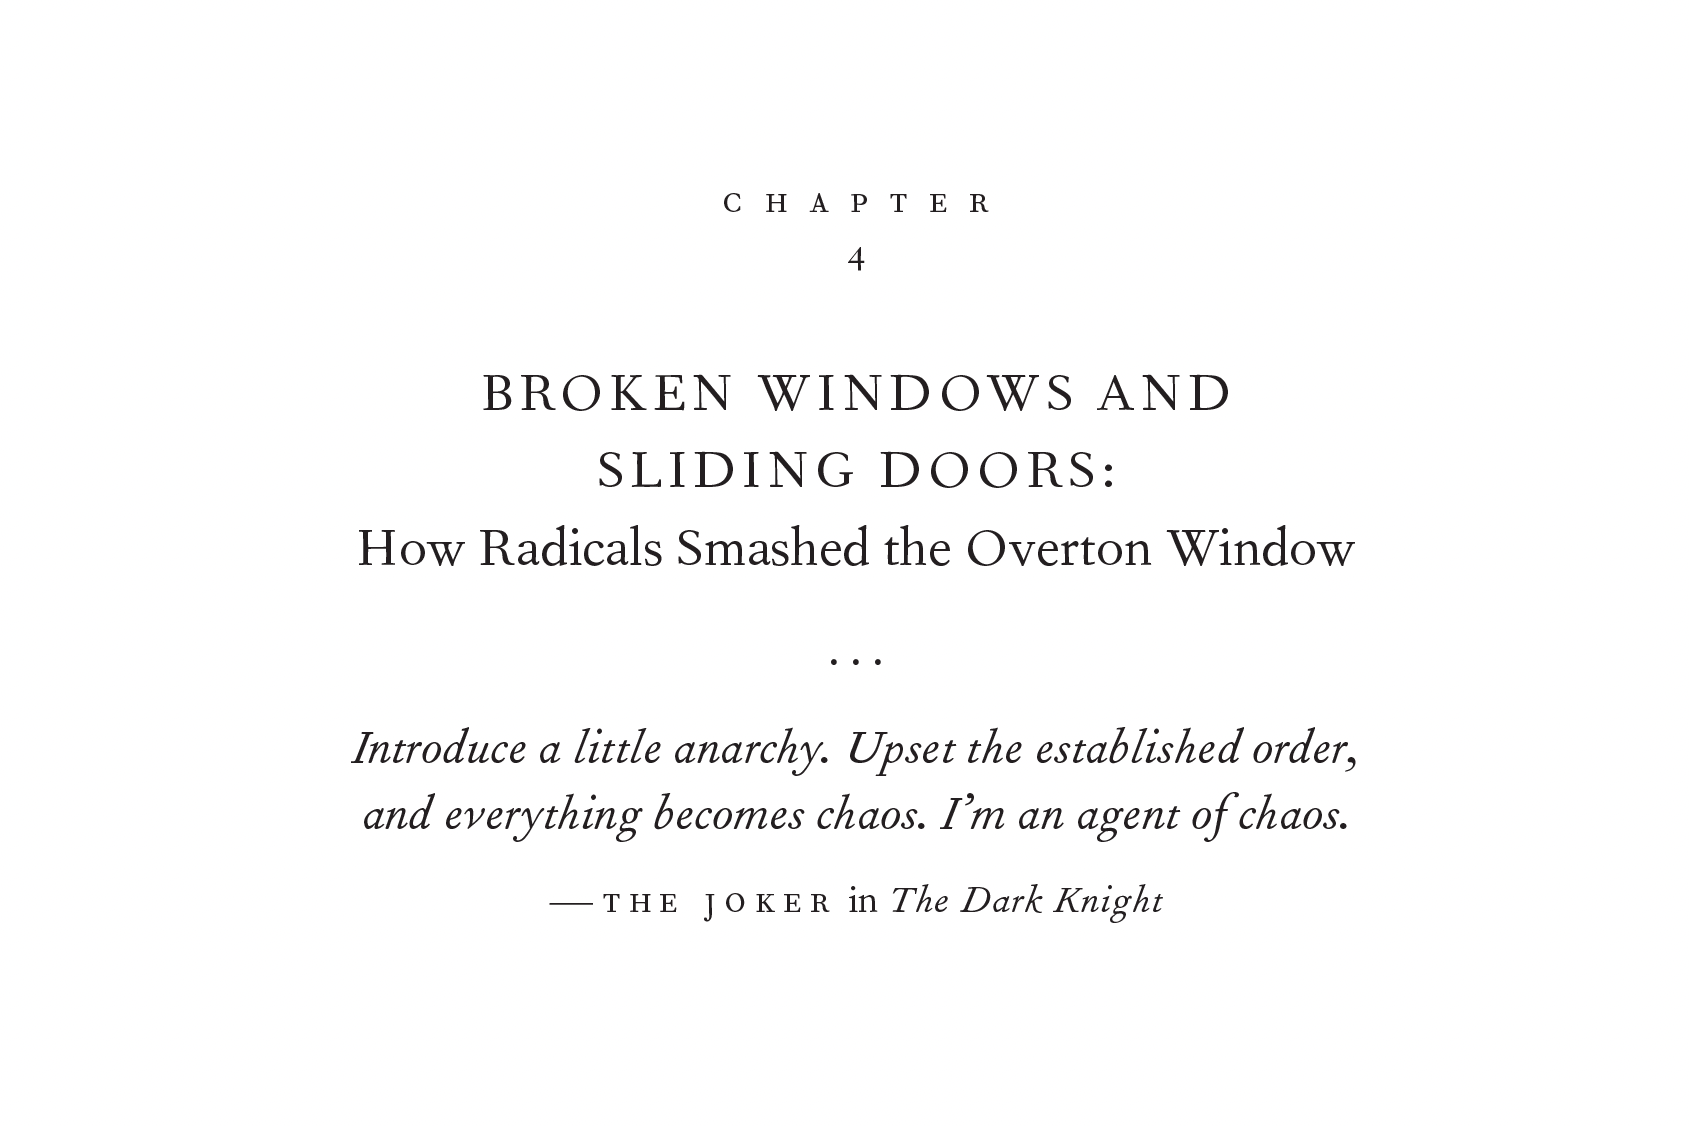 An intro page for Chapter 4, titled "Broken Windows and Sliding Doors: How Radicals Smashed the Overton Window." Below that, a quote from the Joker in Dark Knight: "Introduce a little anarchy. Upset the established order, and everything becomes chaos. I'm an agent of chaos."